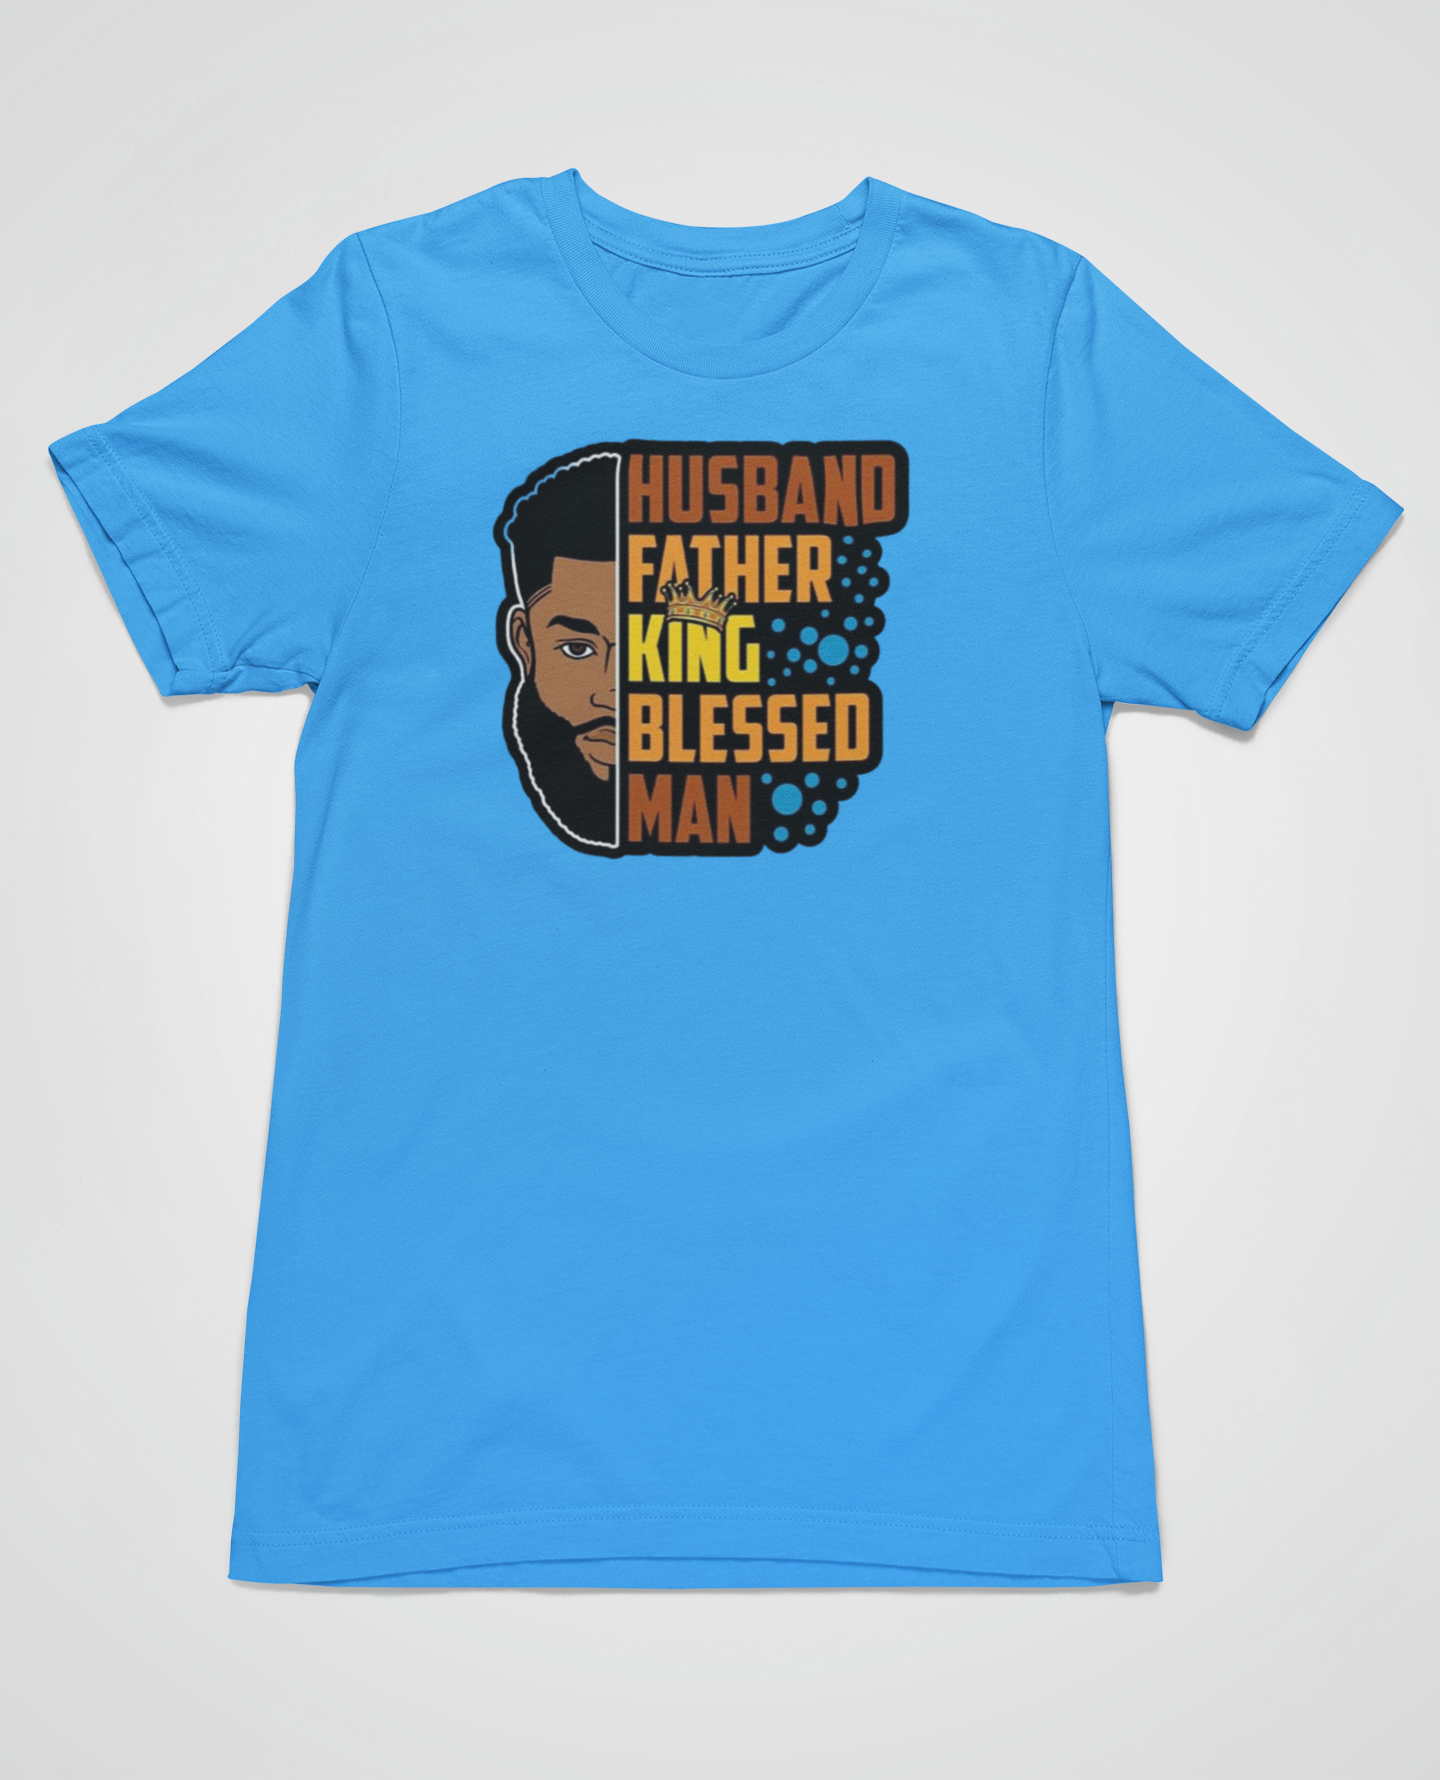 Husband, Father, King, Blessed Man shirt